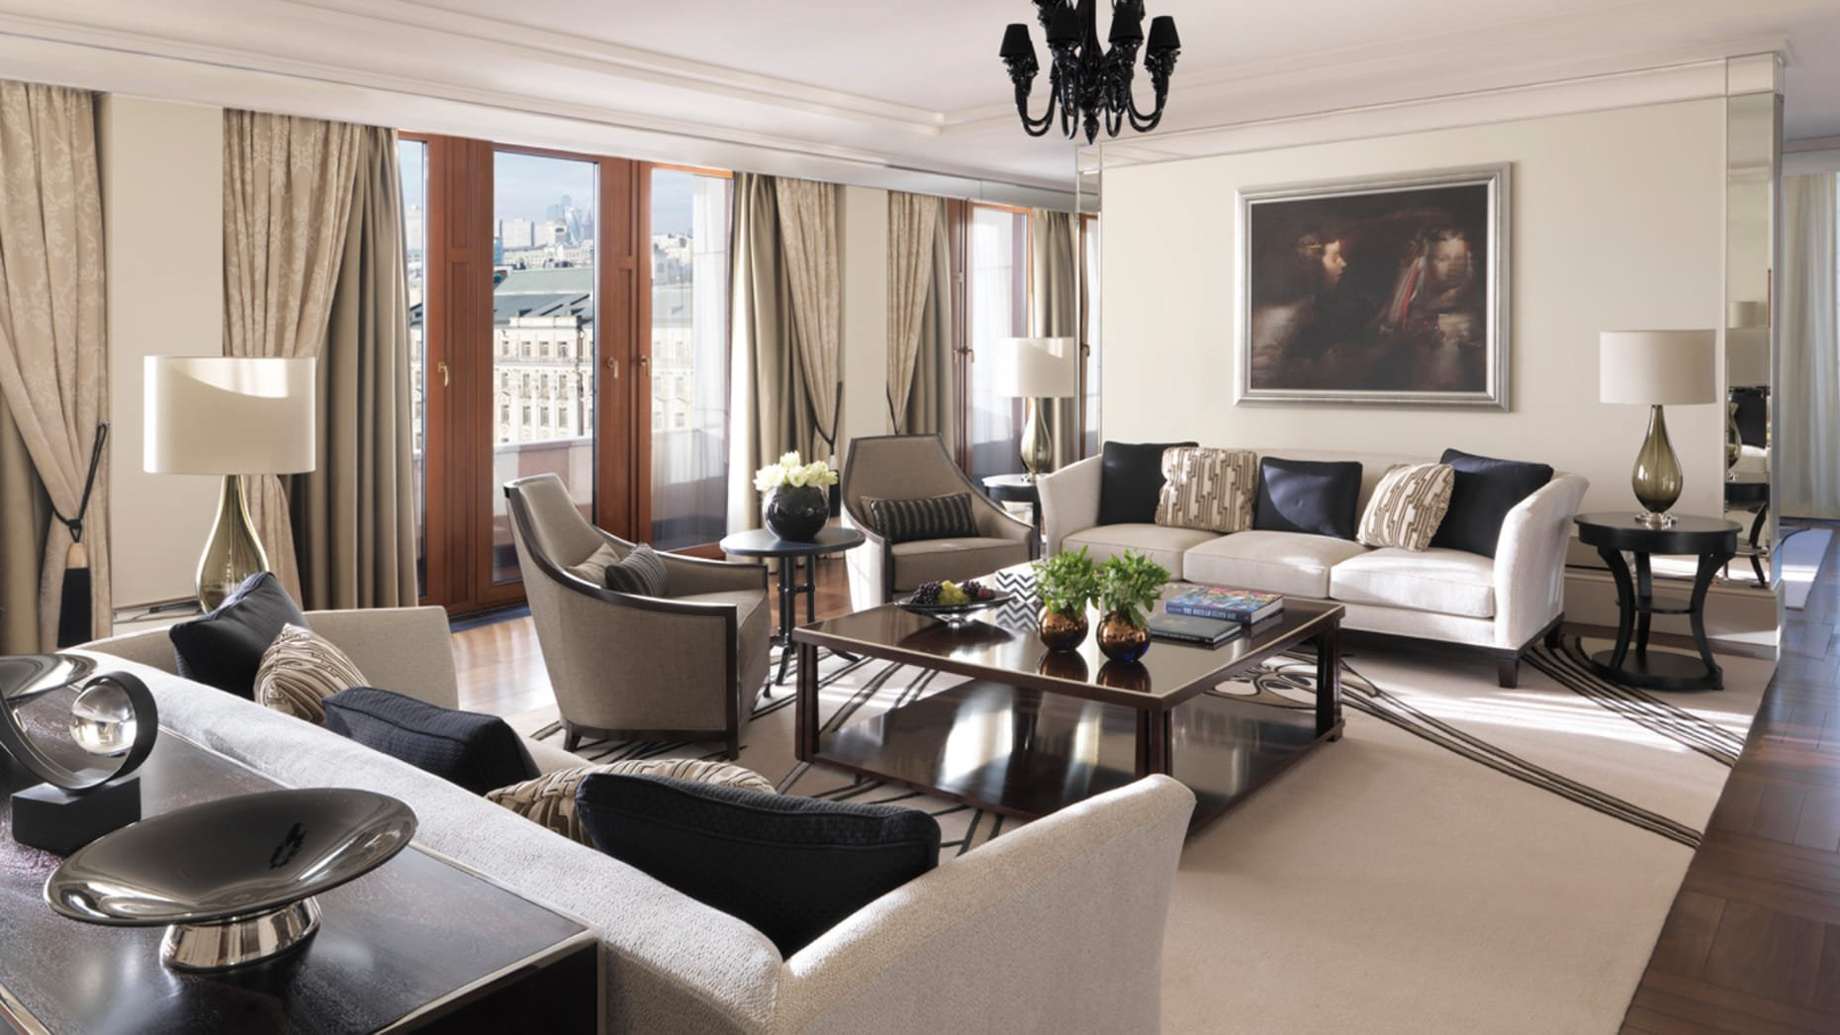 Four Seasons Hotel Moscow – Moscow, Russia – Royal North Suite Interior